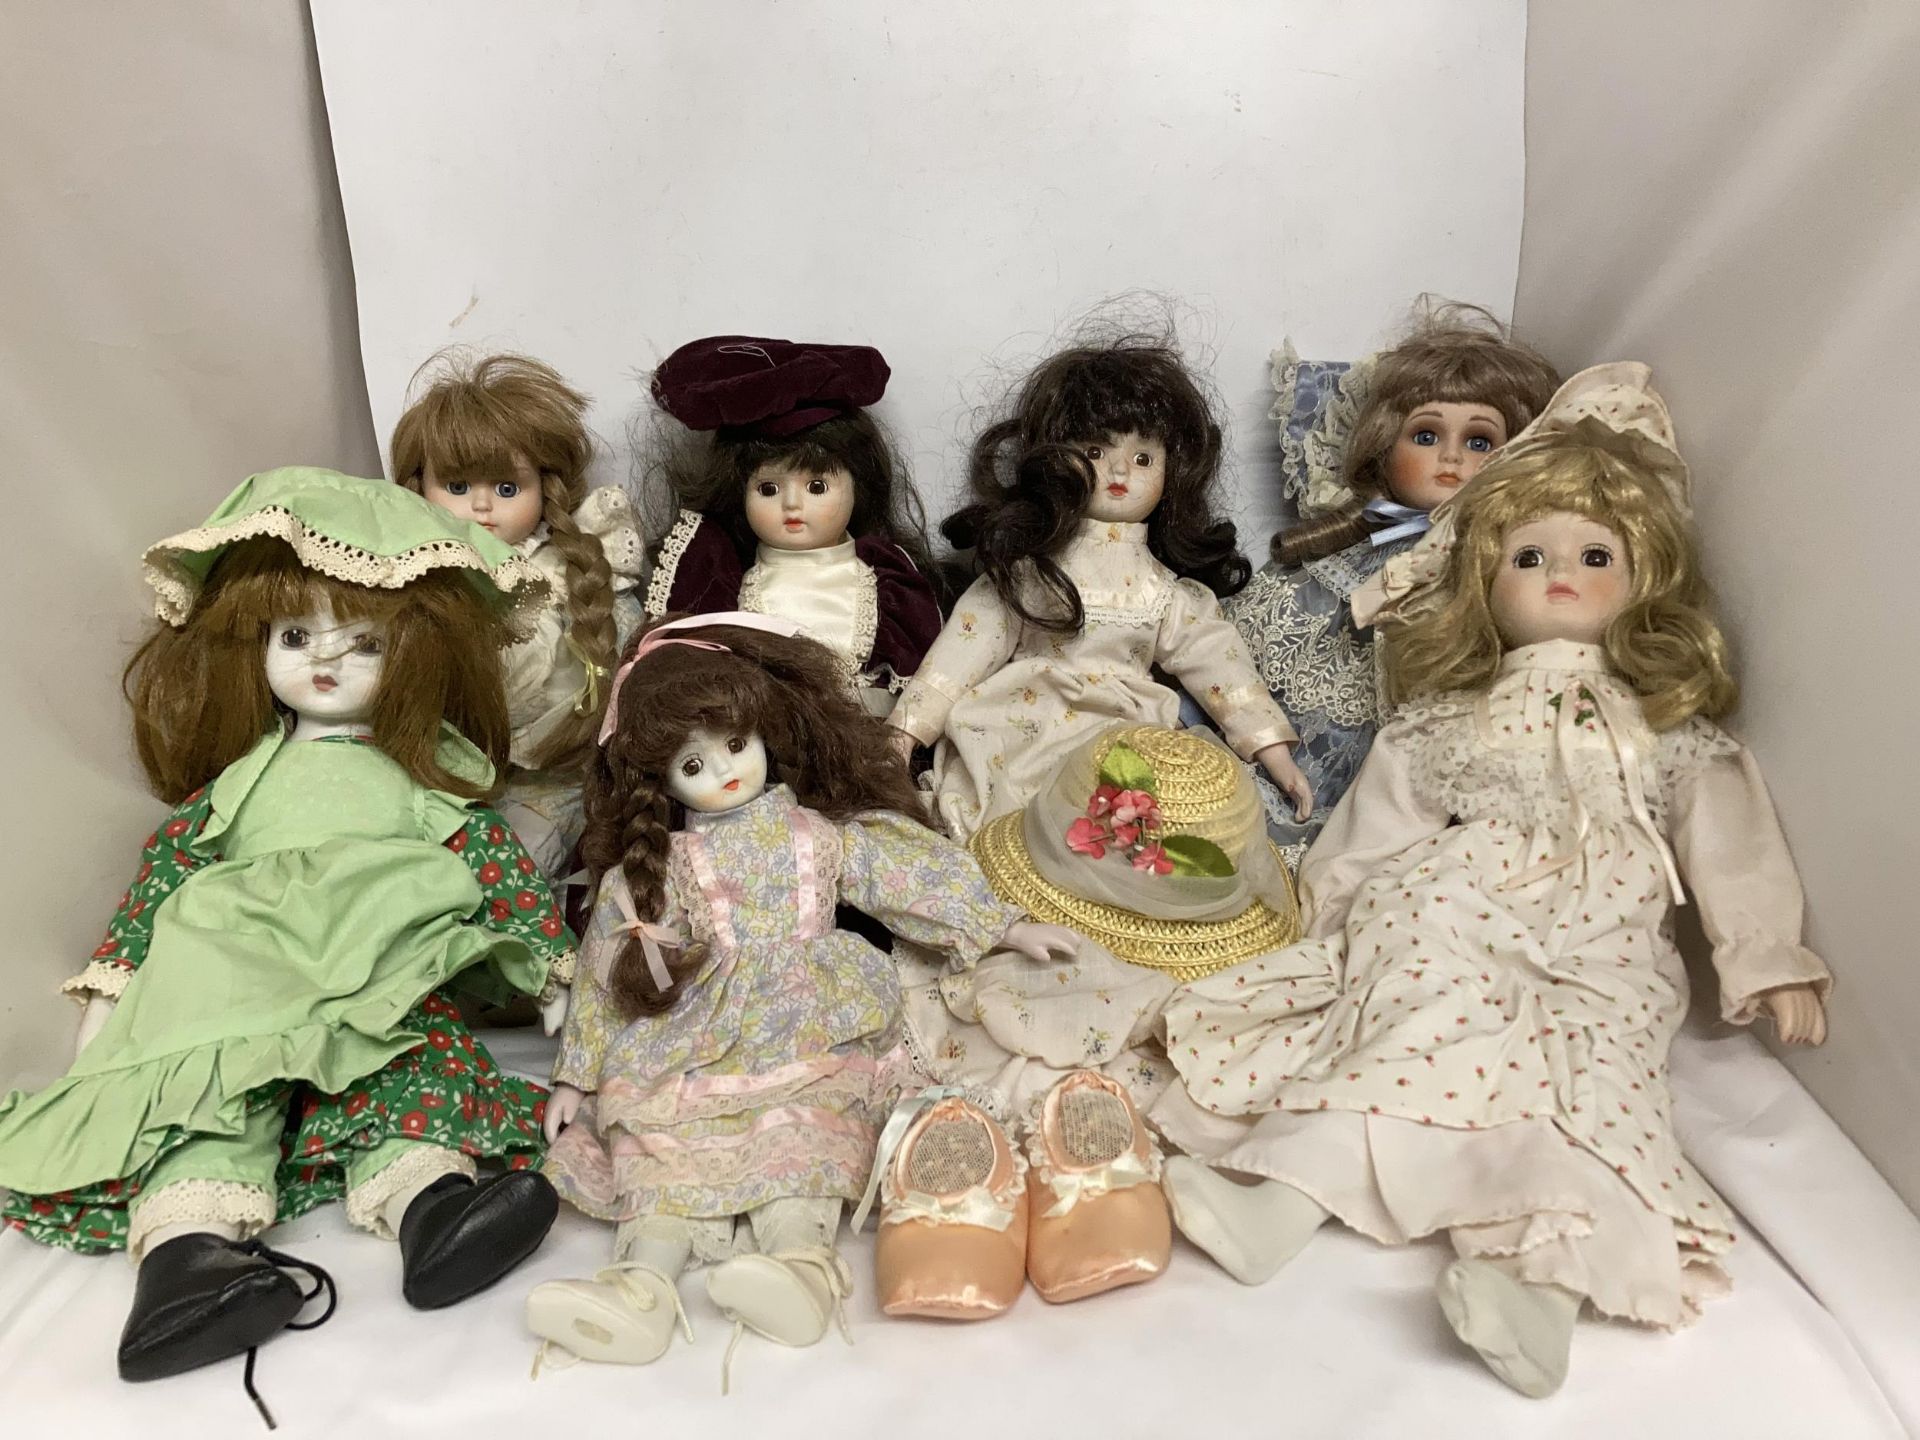 A COLLECTION OF PORCELAIN HEADED DOLLS IN COSTUMES - 7 IN TOTAL